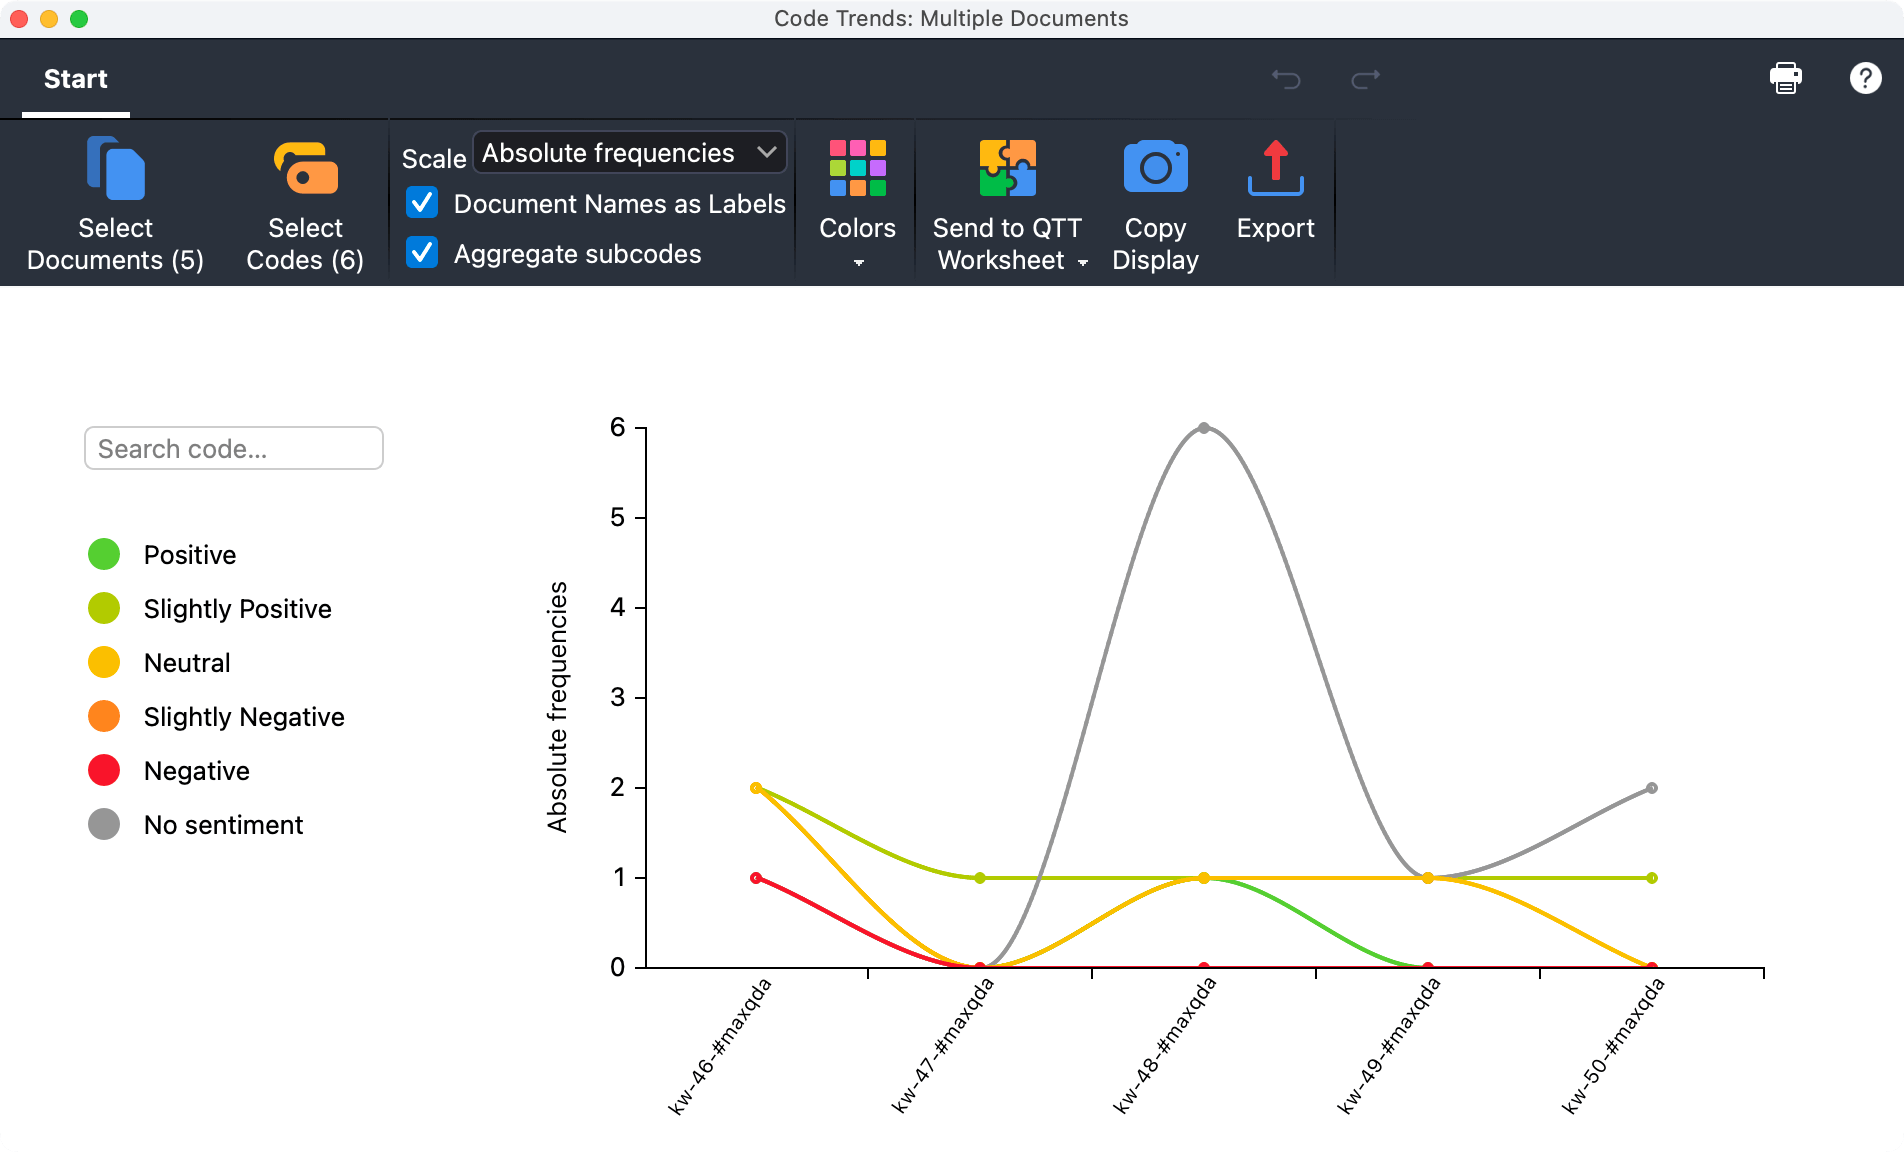 Social media research: Visualizing sentiment trends for #maxqda across weeks